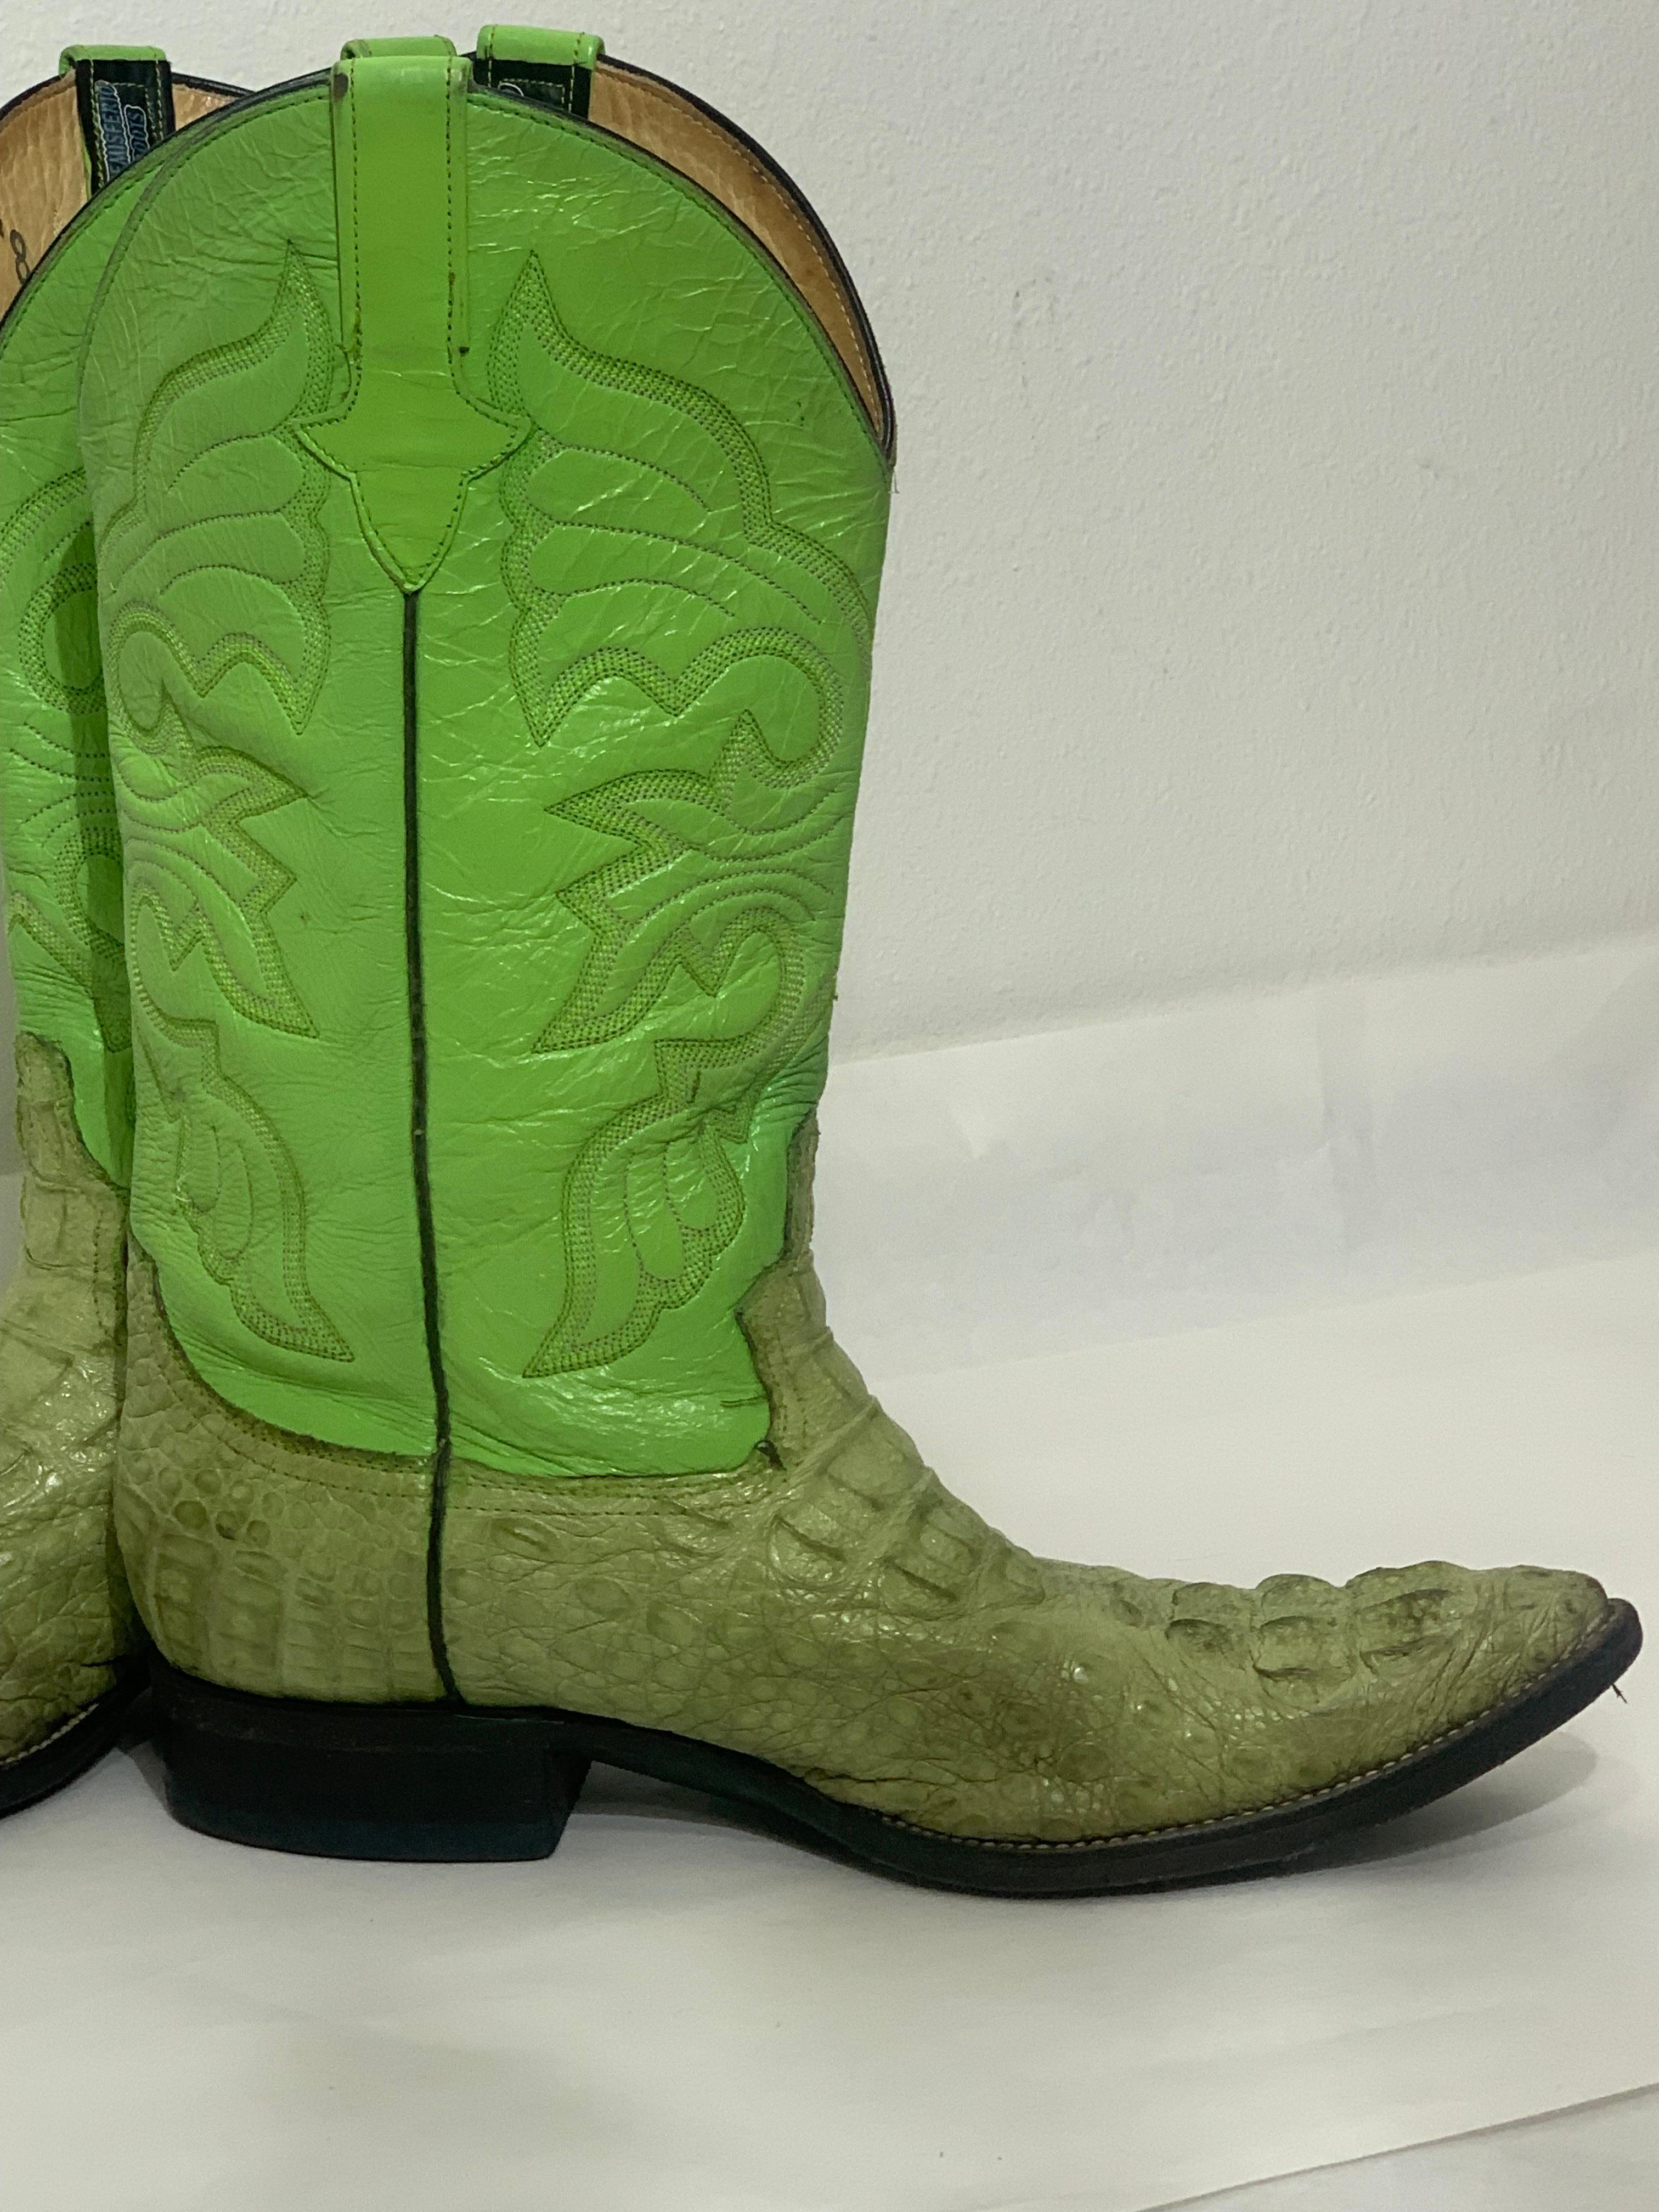 Gecko Green Leather & Crocodile Western Cowboy Boots US Size 8 For Sale 4